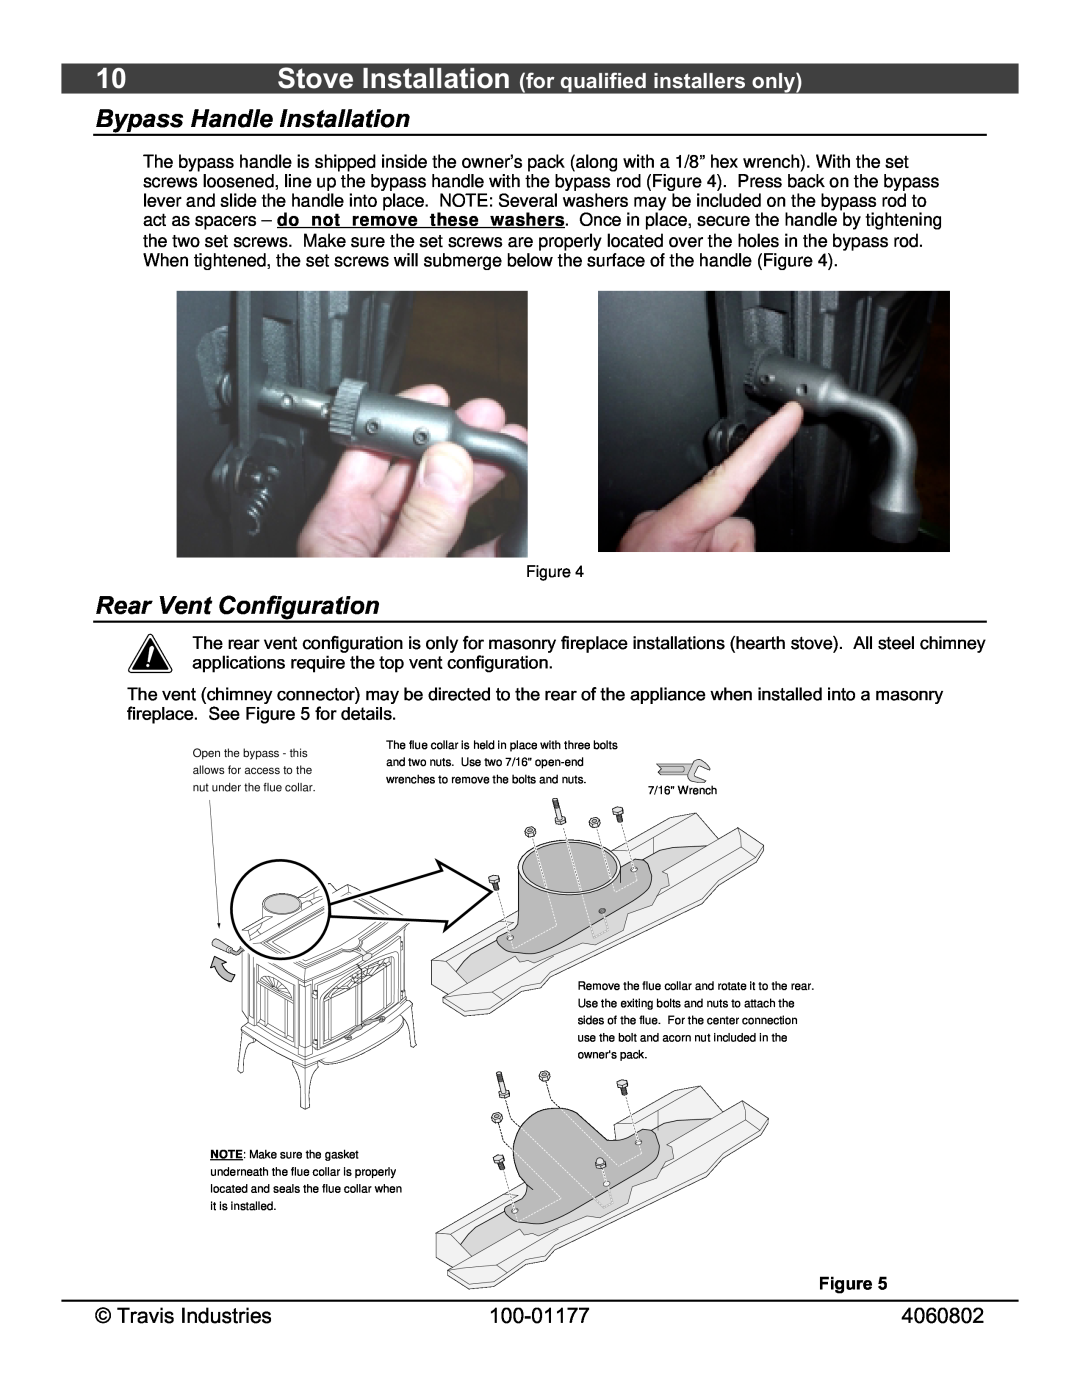 Lopi 028-S-75-2 Bypass Handle Installation, Rear Vent Configuration, Stove Installation for qualified installers only 